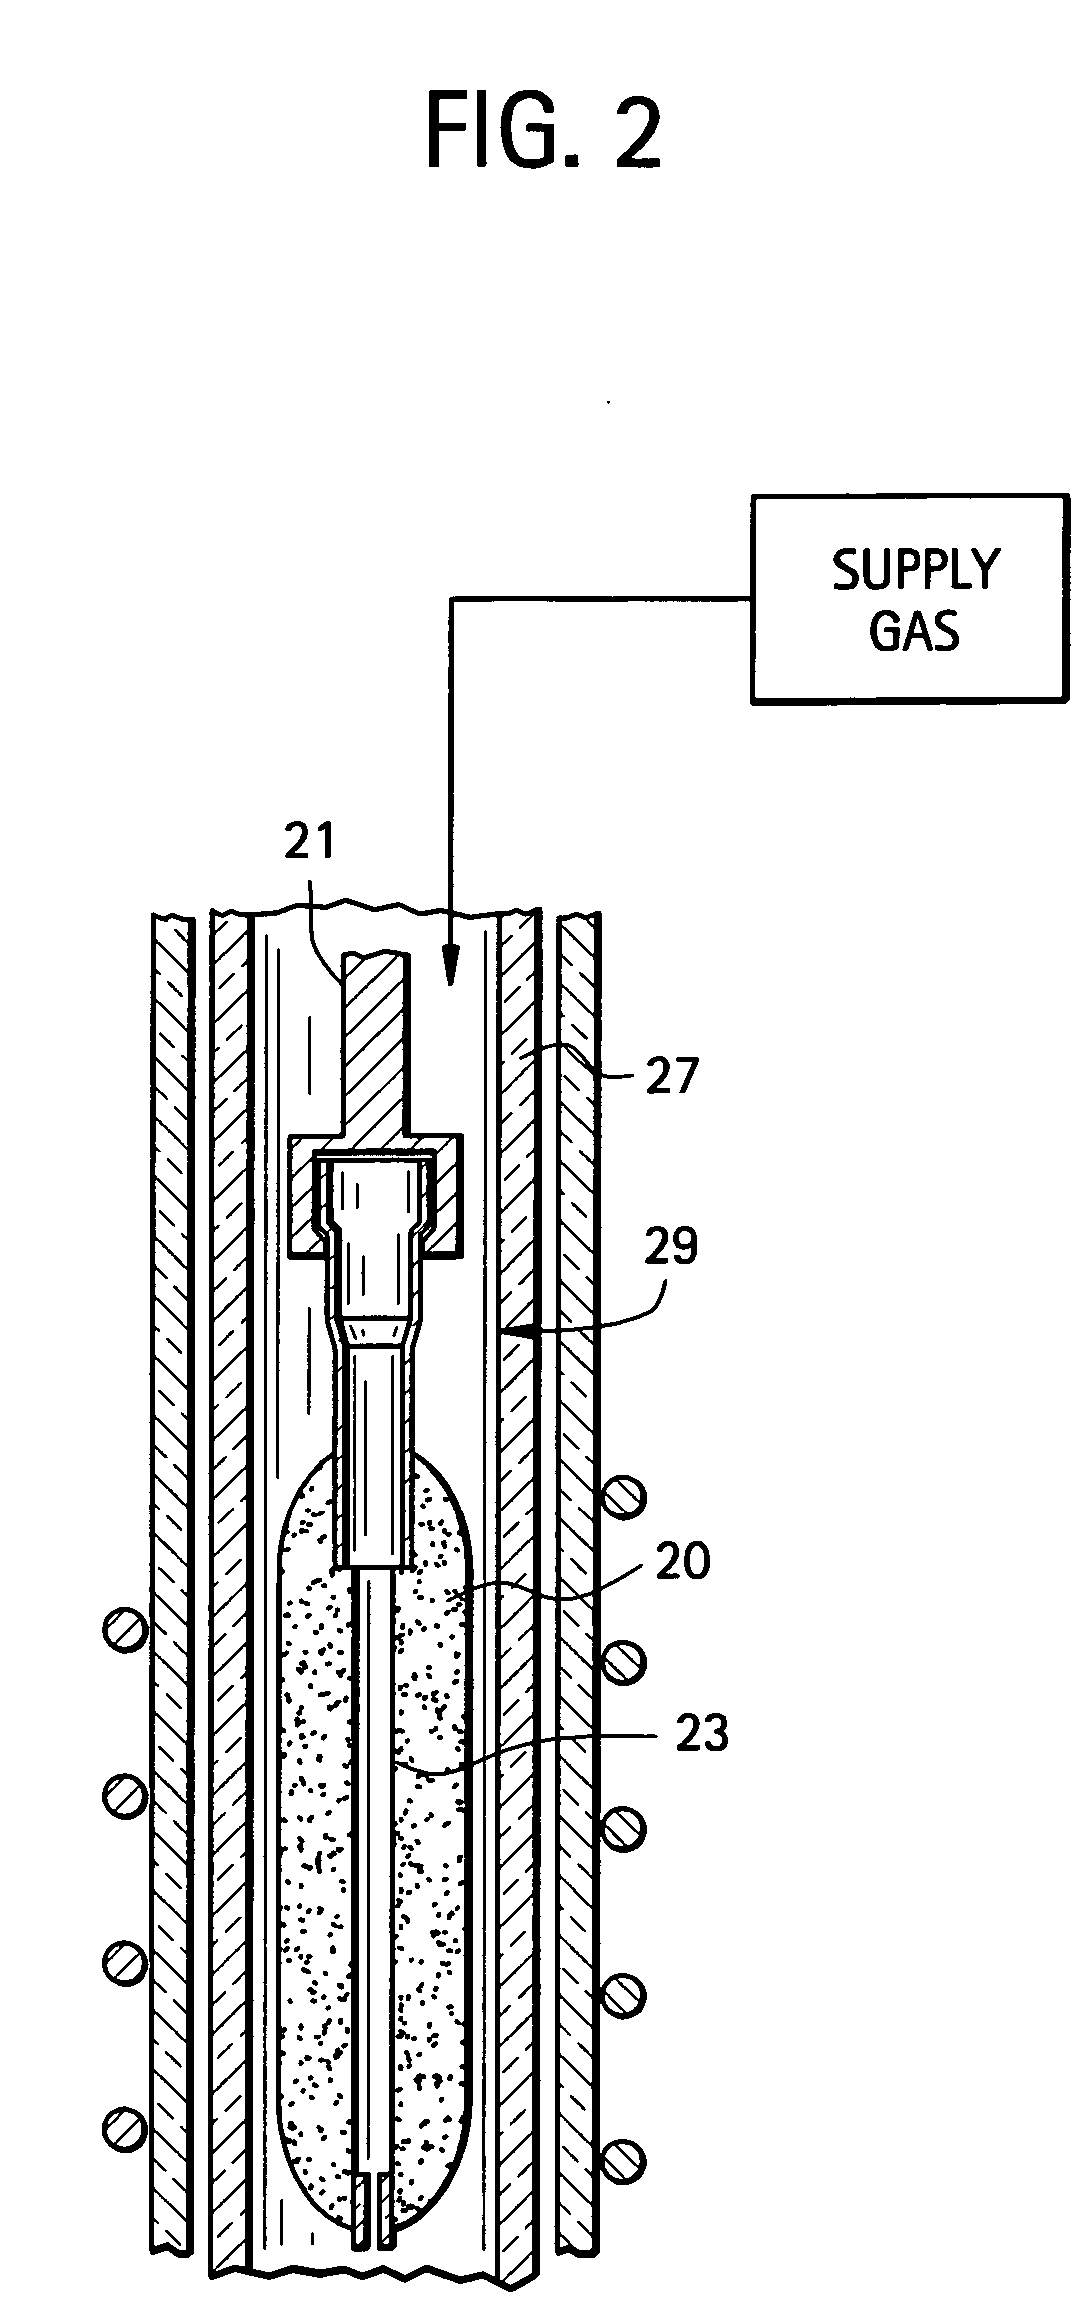 Microstructured optical fibers and methods